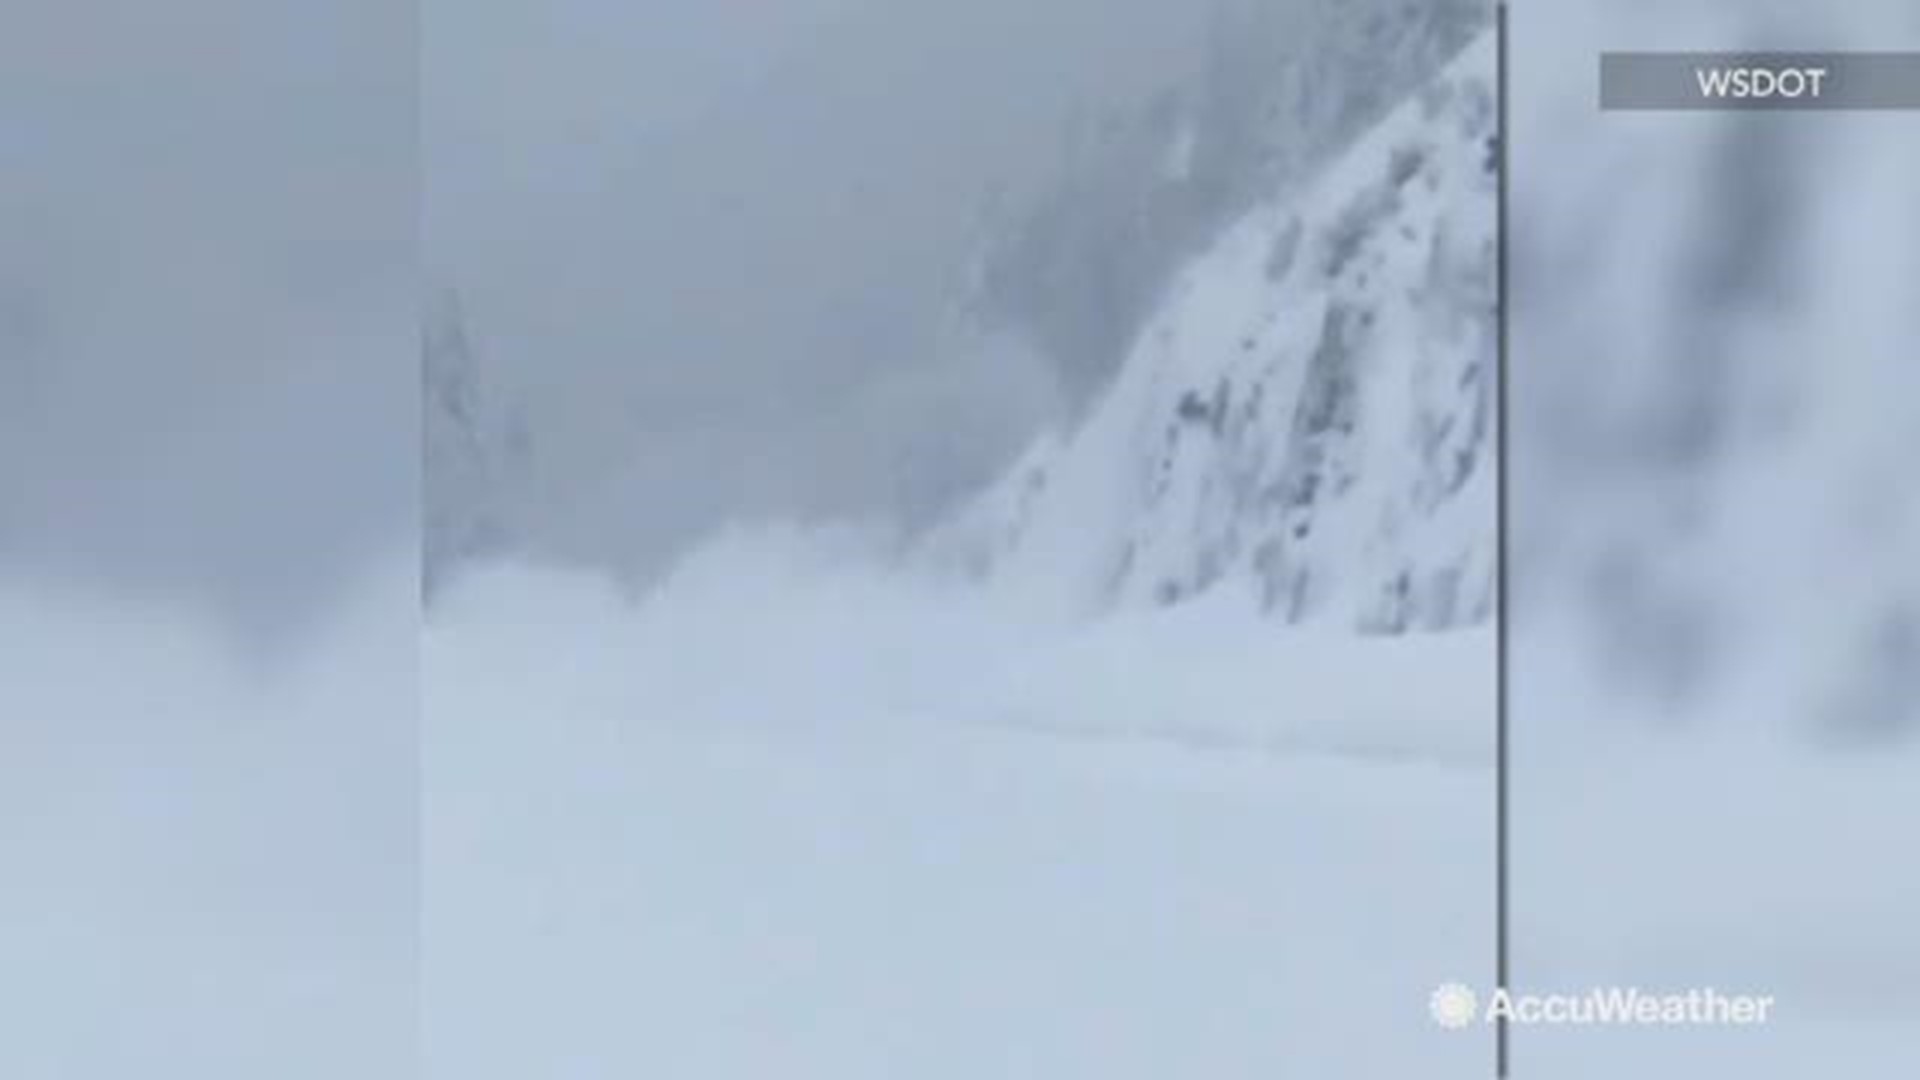 To prevent avalanches, ski patrols and other organizations use avalanche control.